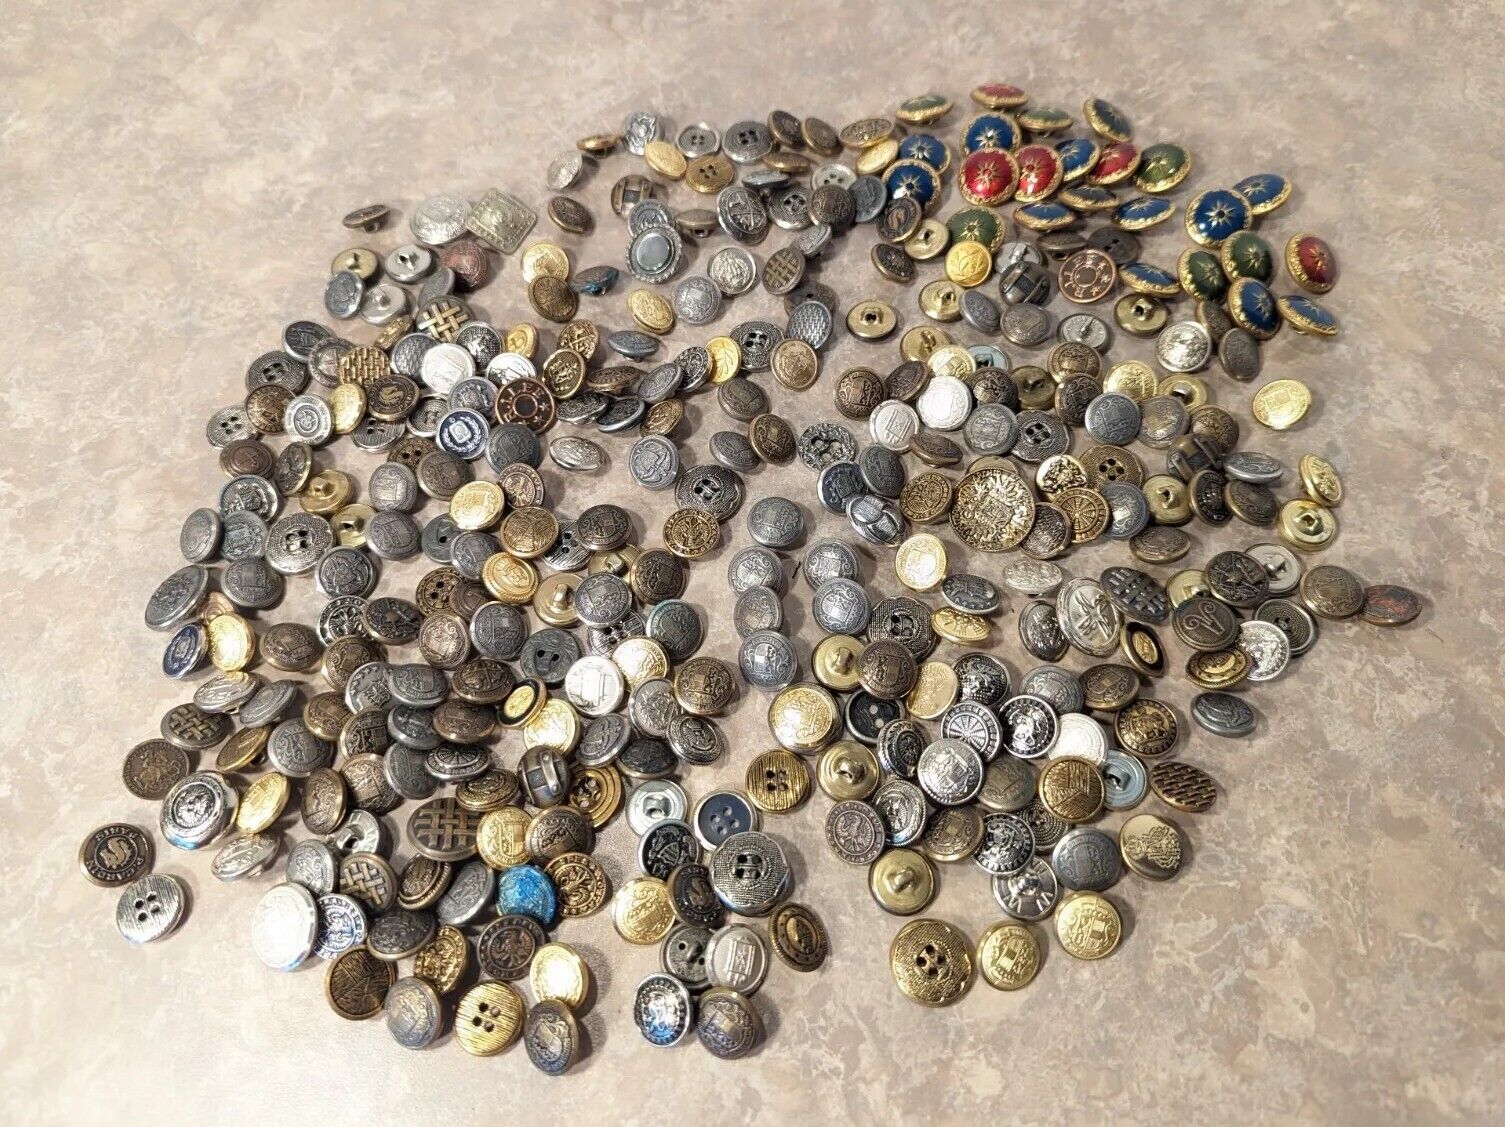 Large Lot 322 Vintage Metal Buttons Mixed Variety and Styles * Estate Grouping *